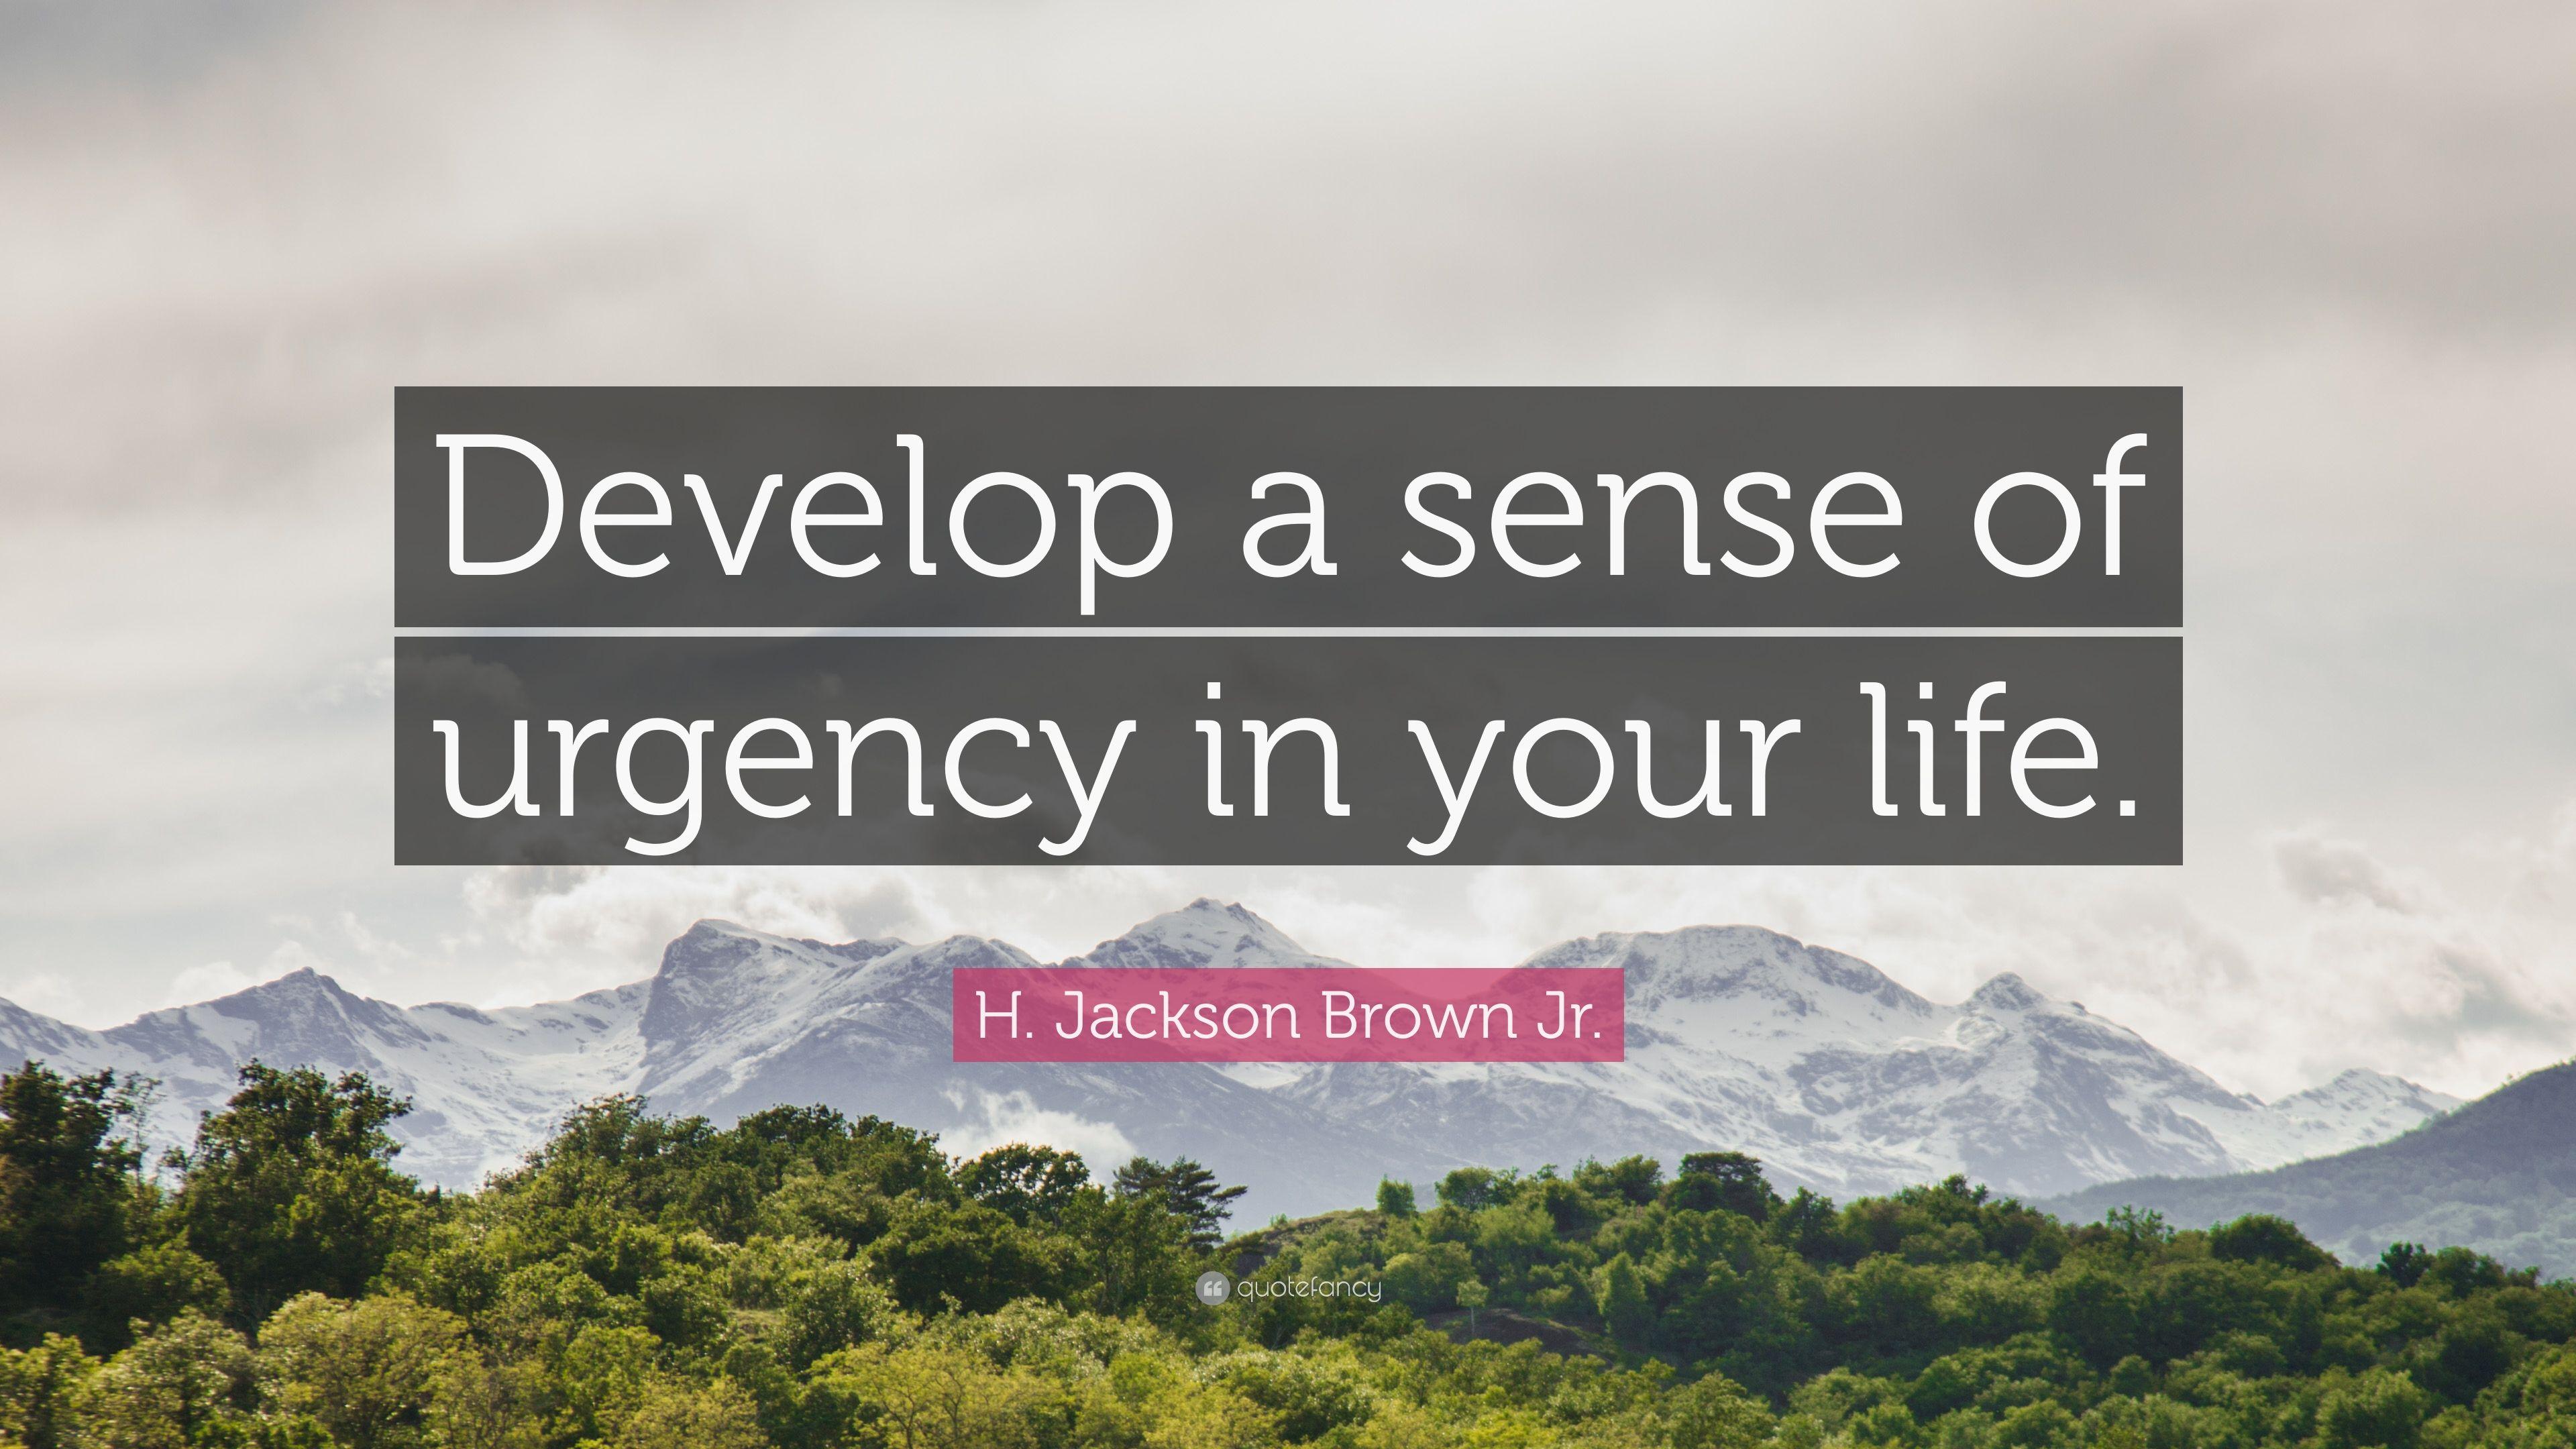 H. Jackson Brown Jr. Quote: “Develop a sense of urgency in your